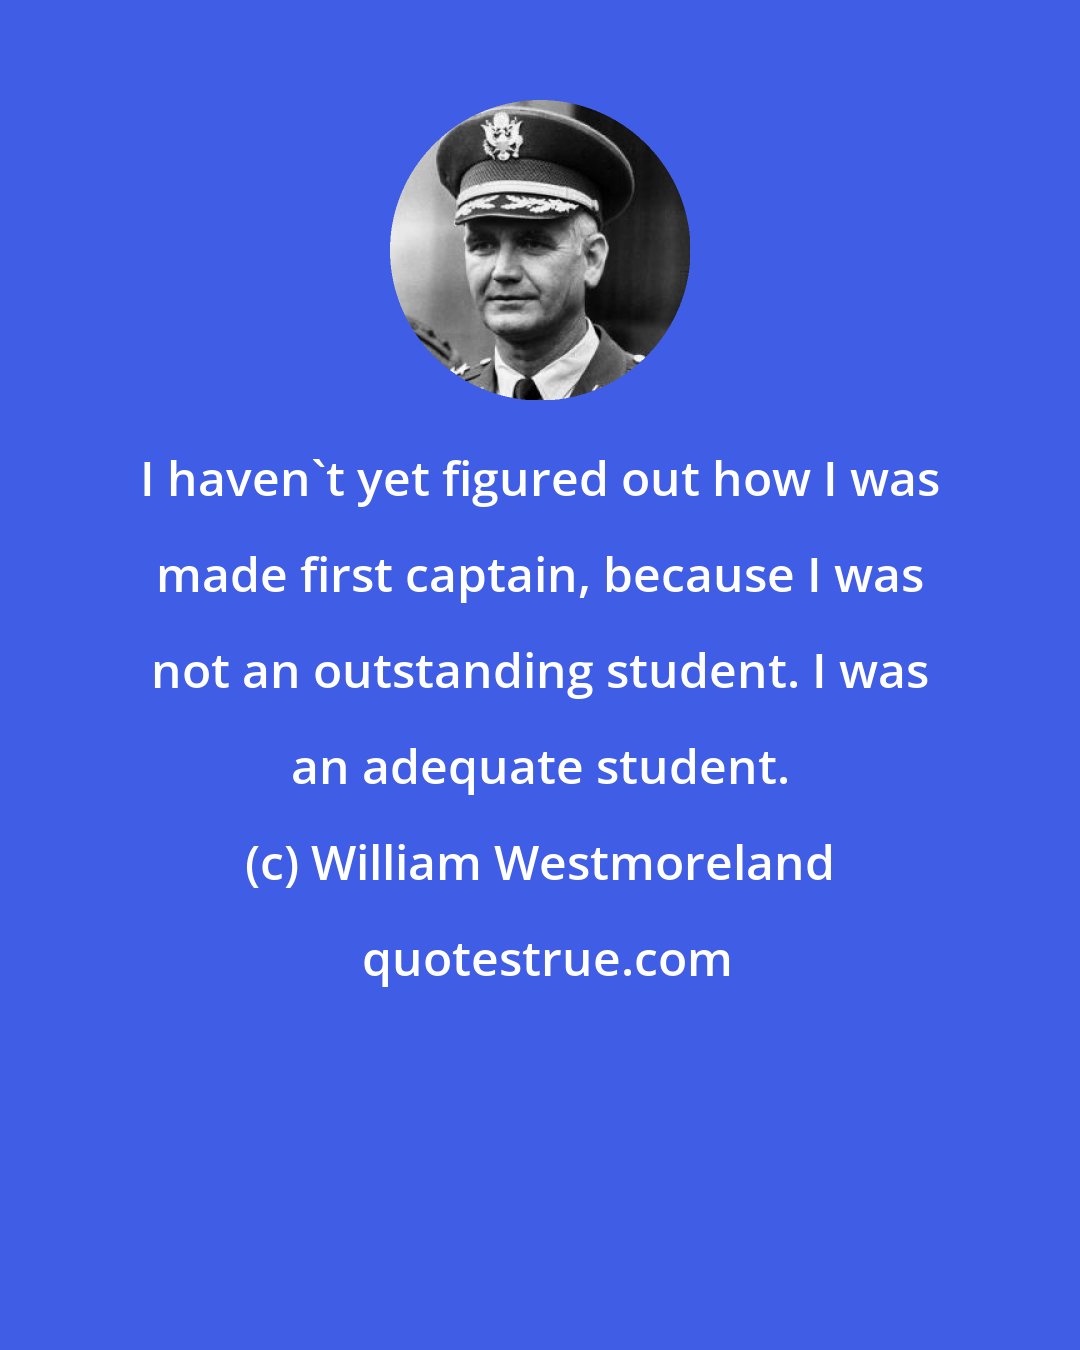 William Westmoreland: I haven't yet figured out how I was made first captain, because I was not an outstanding student. I was an adequate student.